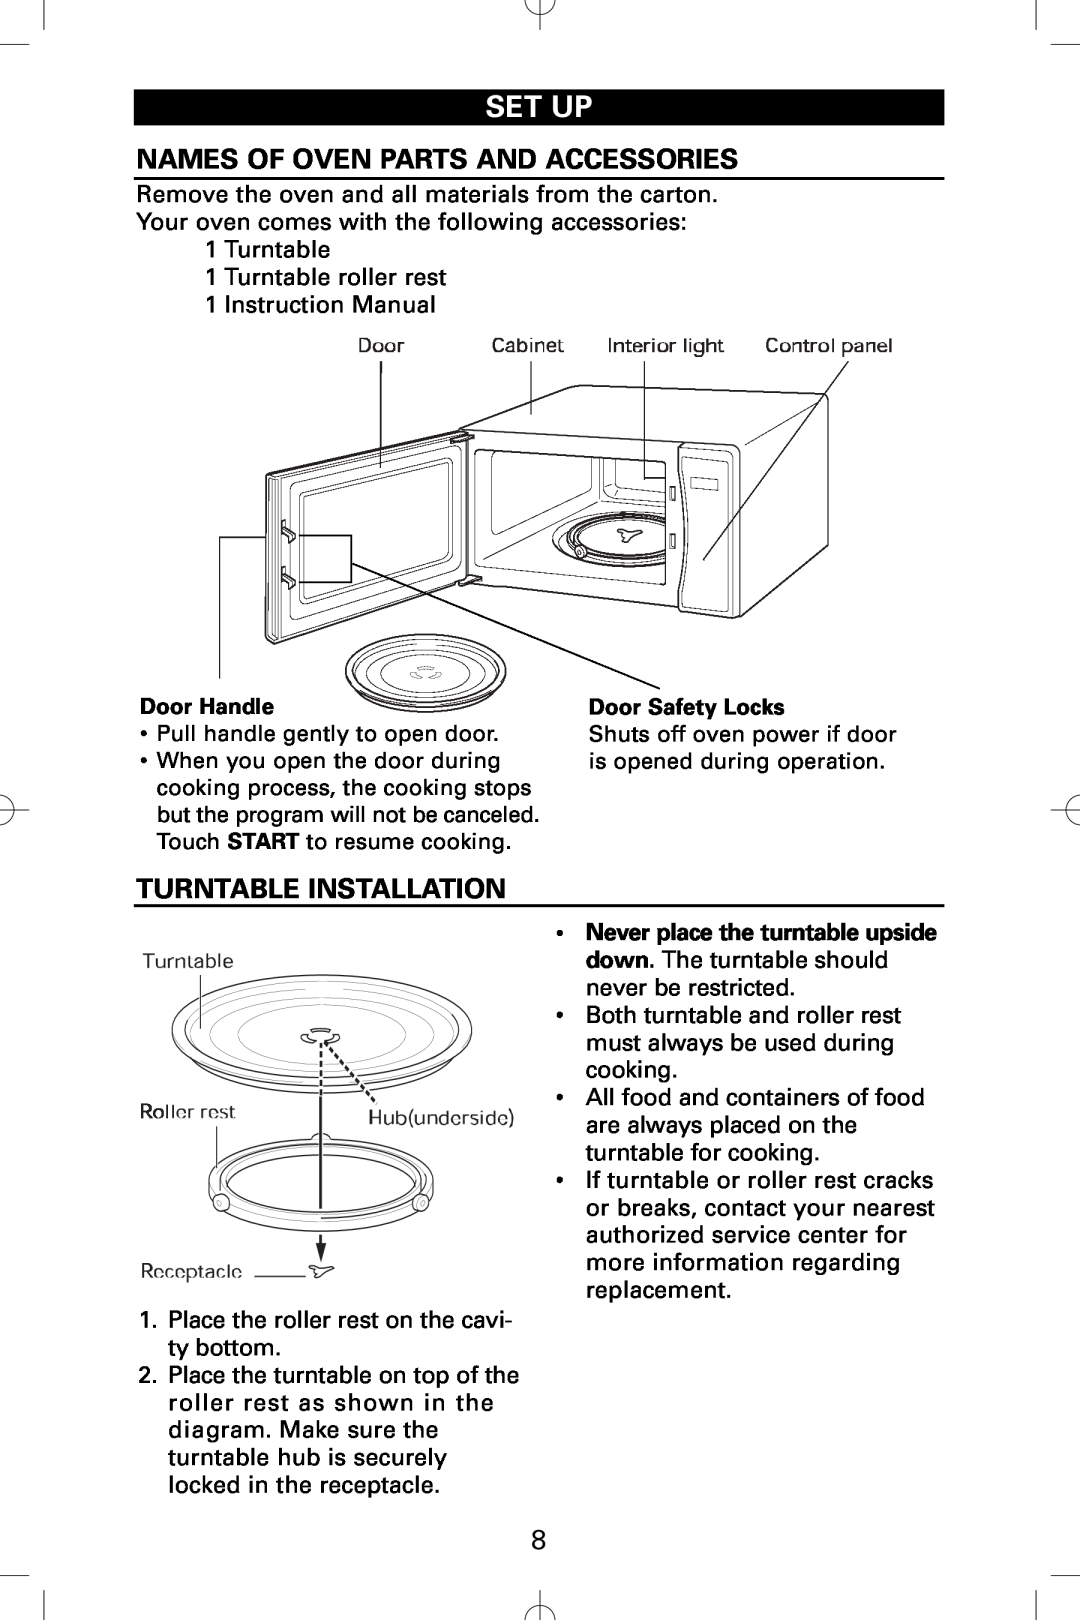 Sanyo EM-S5002W instruction manual Set Up, Names Of Oven Parts And Accessories, Turntable Installation 